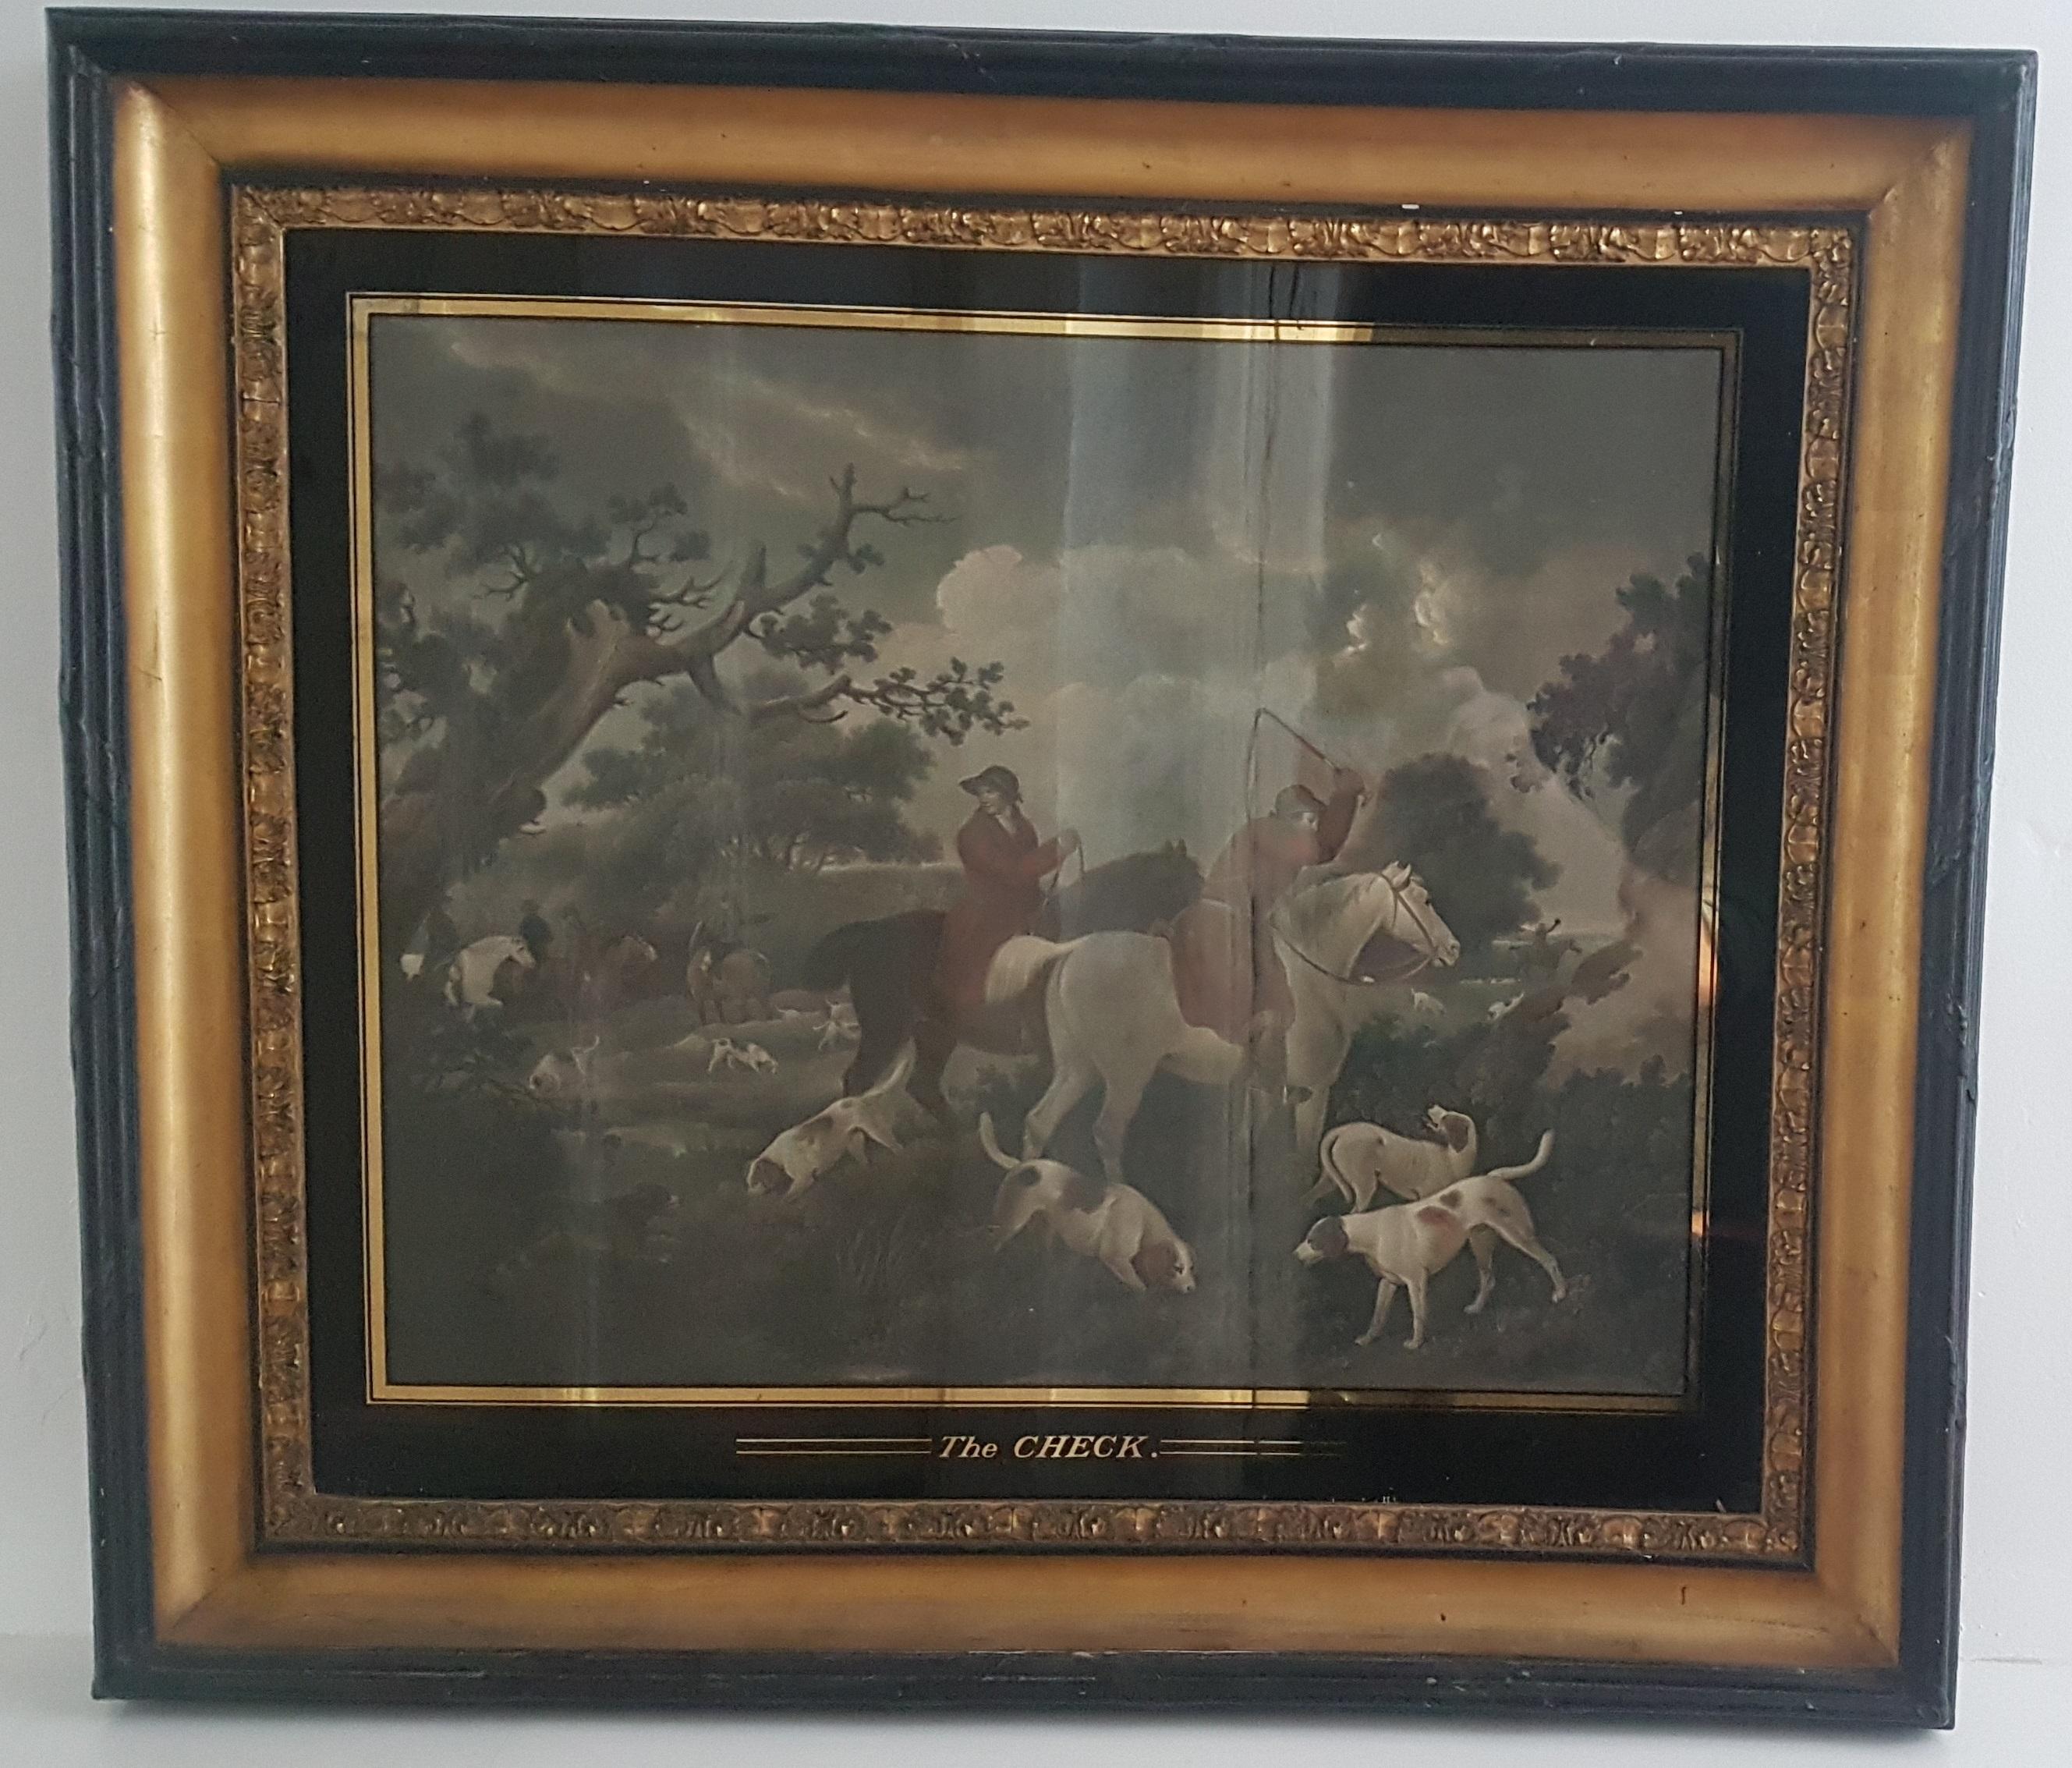 A large early 19th century English School hand colored print of a fox hunting scene titled 'The Check'. The hand colored print is in fair condition and is in what appears to be the original frame that is gilt and ebonized with the églomisé glass